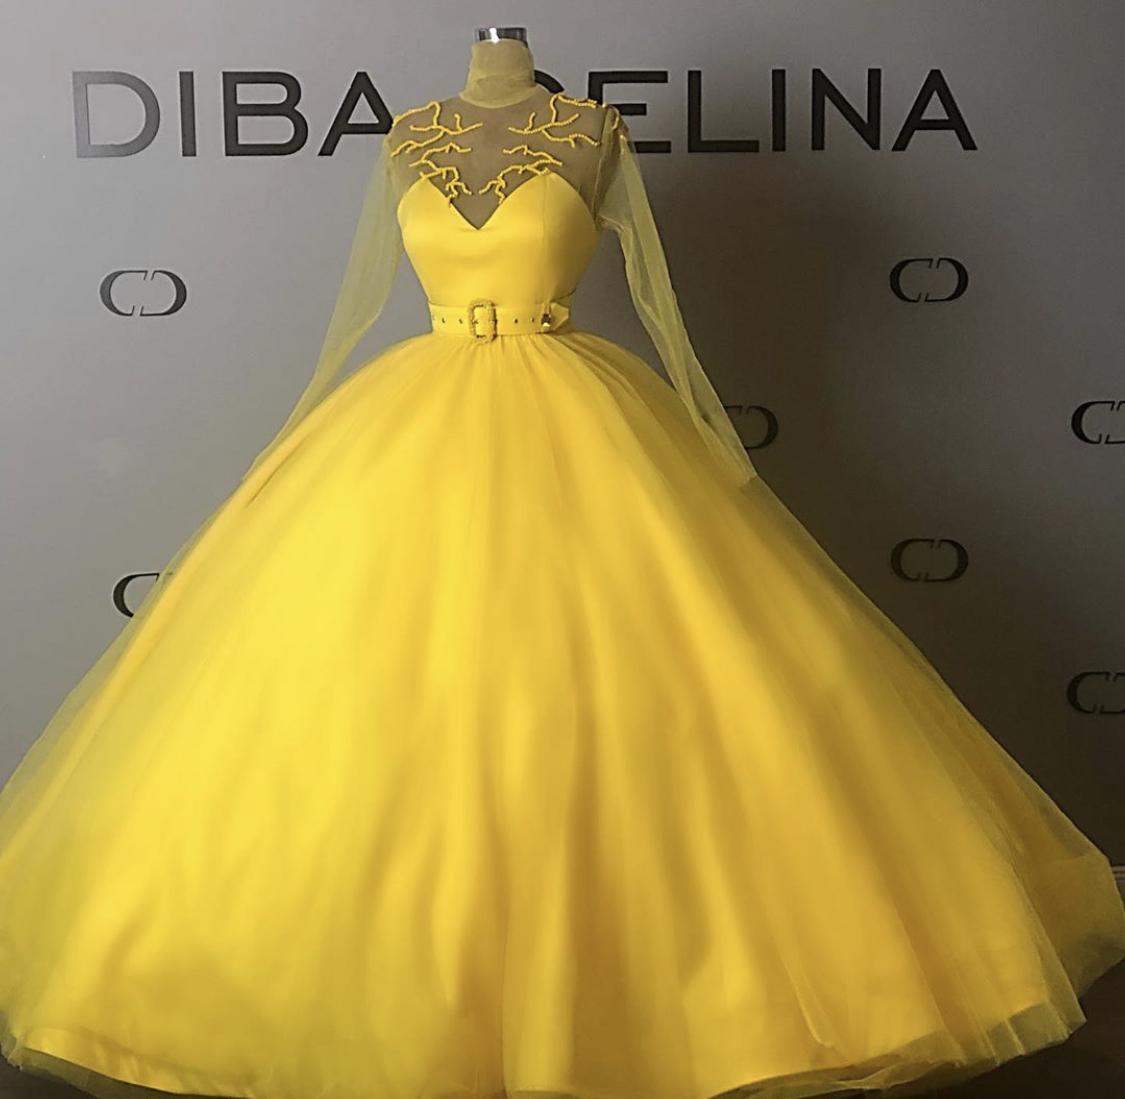 

2020 Modern Yellow High Neck Quinceanera Dresses Prom Ball Gowns Sashes Pearls Illusion Long Sleeves Sweet 16 Girls Dress Vestidos De Novia, Light sky blue